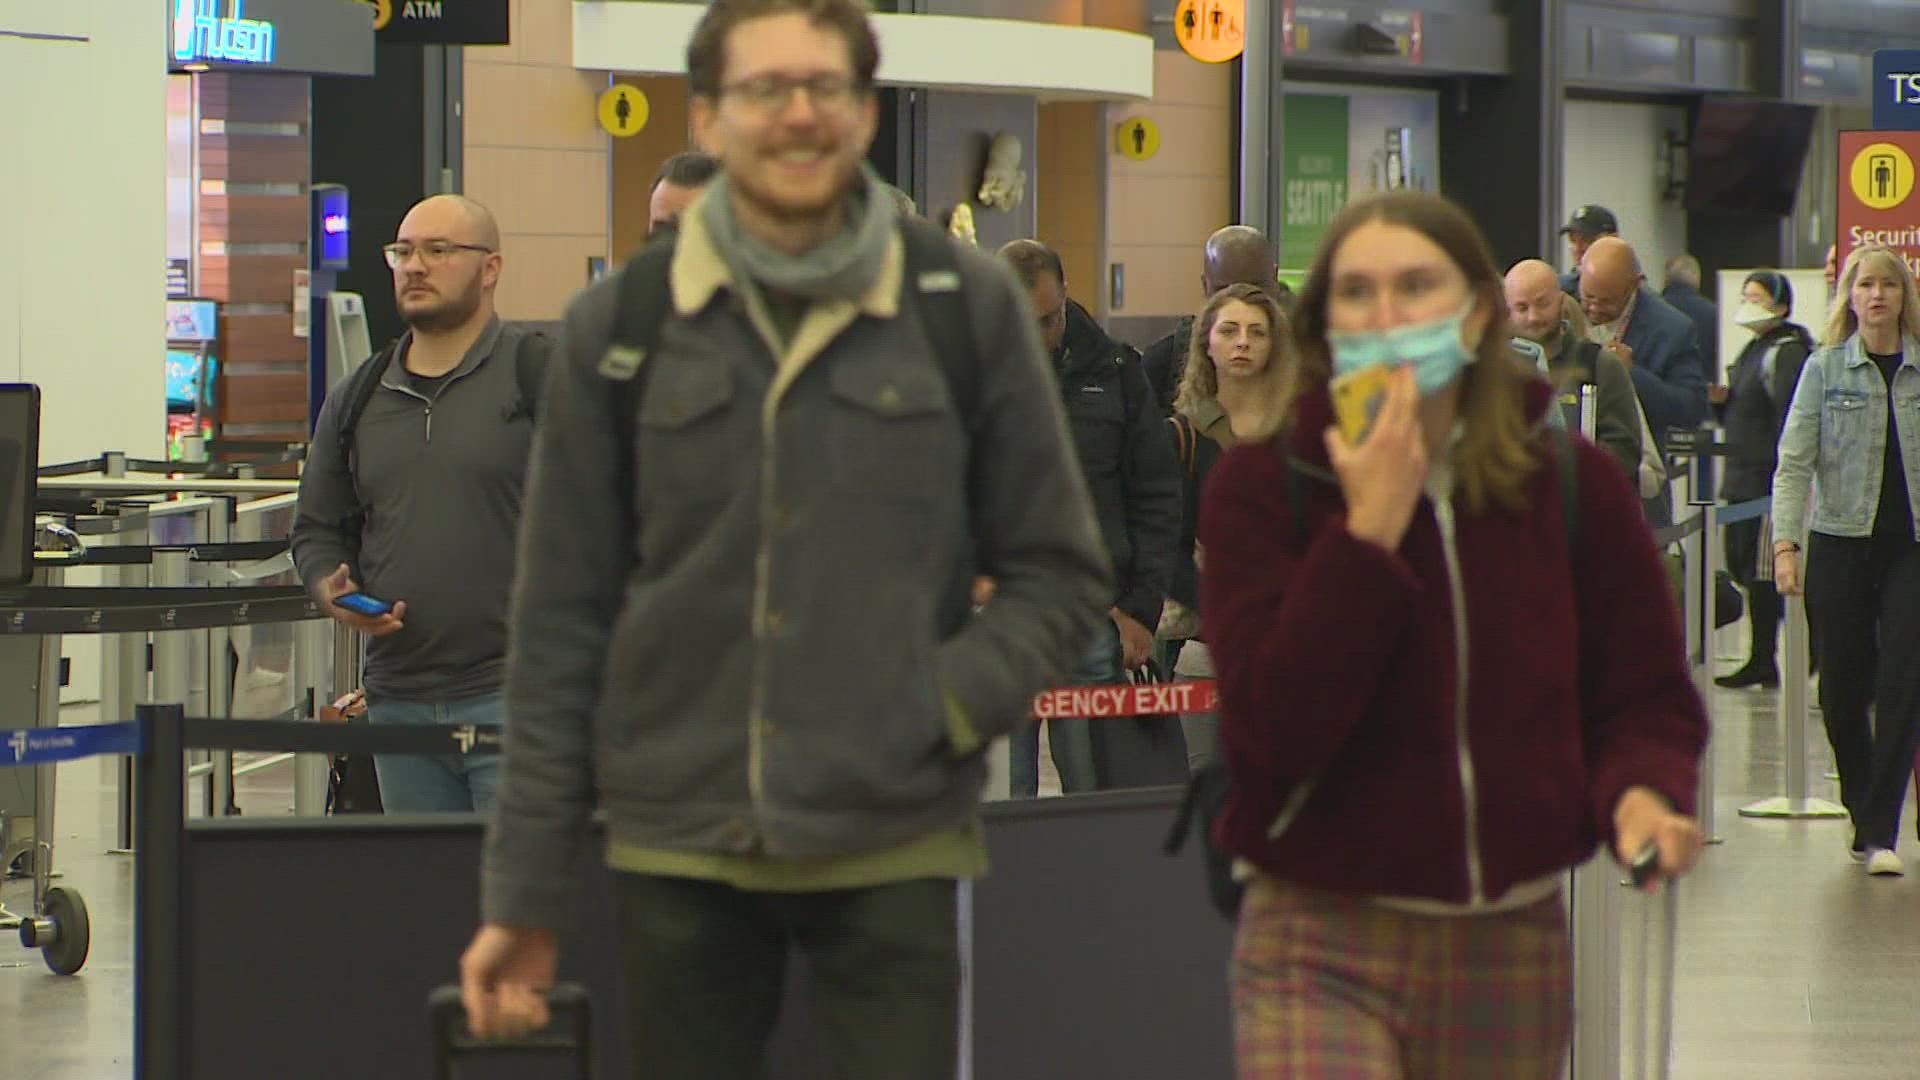 Plenty of passengers at Sea-Tac Wednesday still had their masks on, despite the new optional policy at the airport.